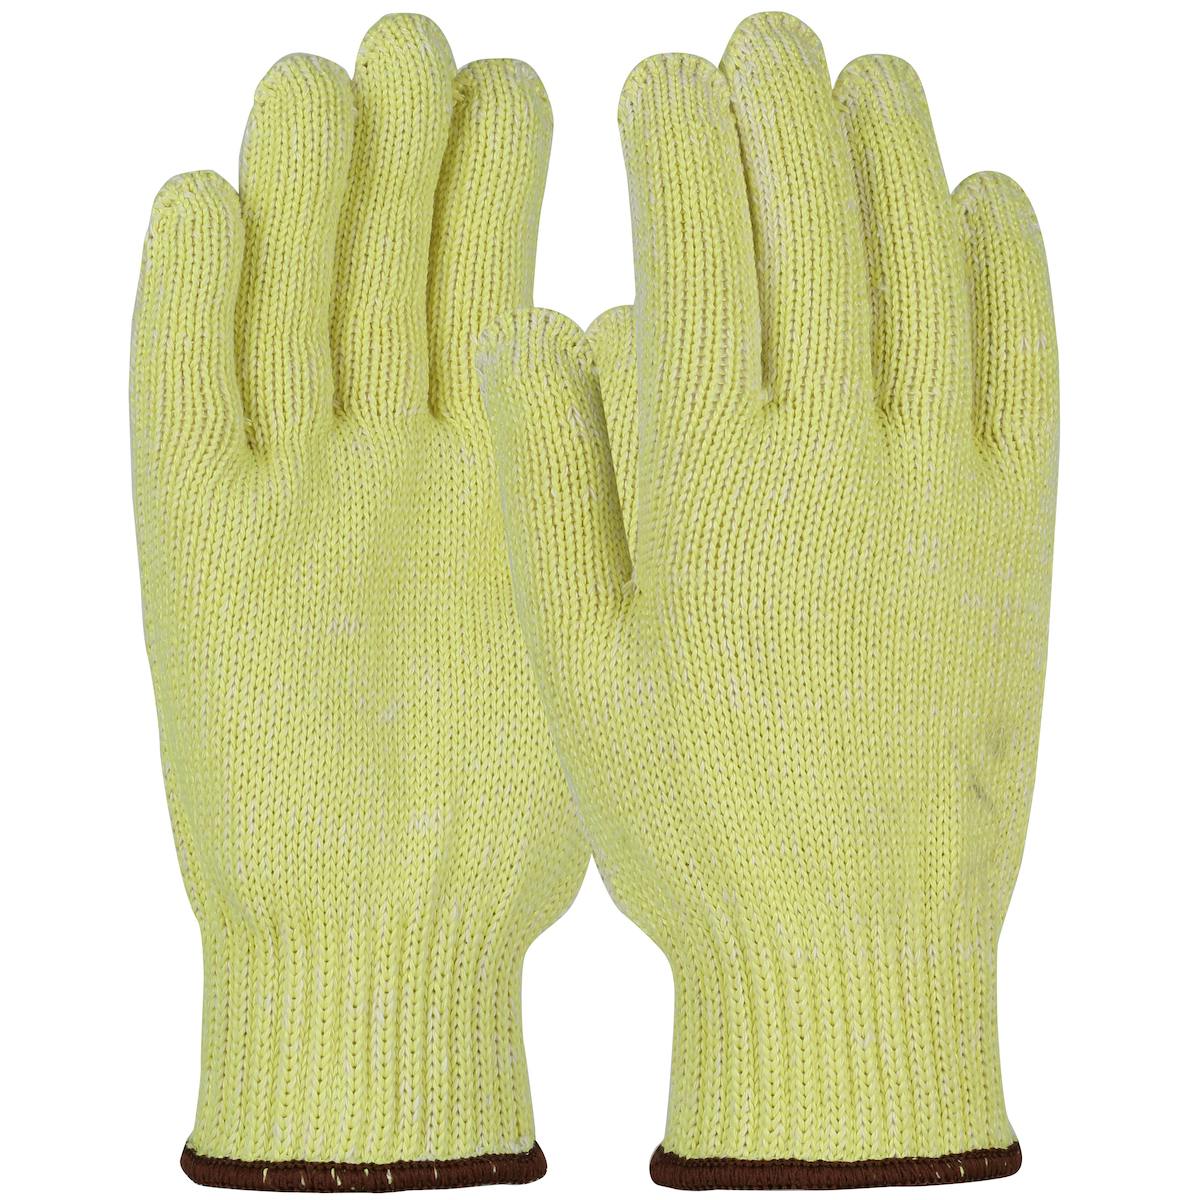 Kut Gard® Seamless Knit ATA® Blended with Cotton Plating Glove - Heavy Weight (MATA30PL)_0